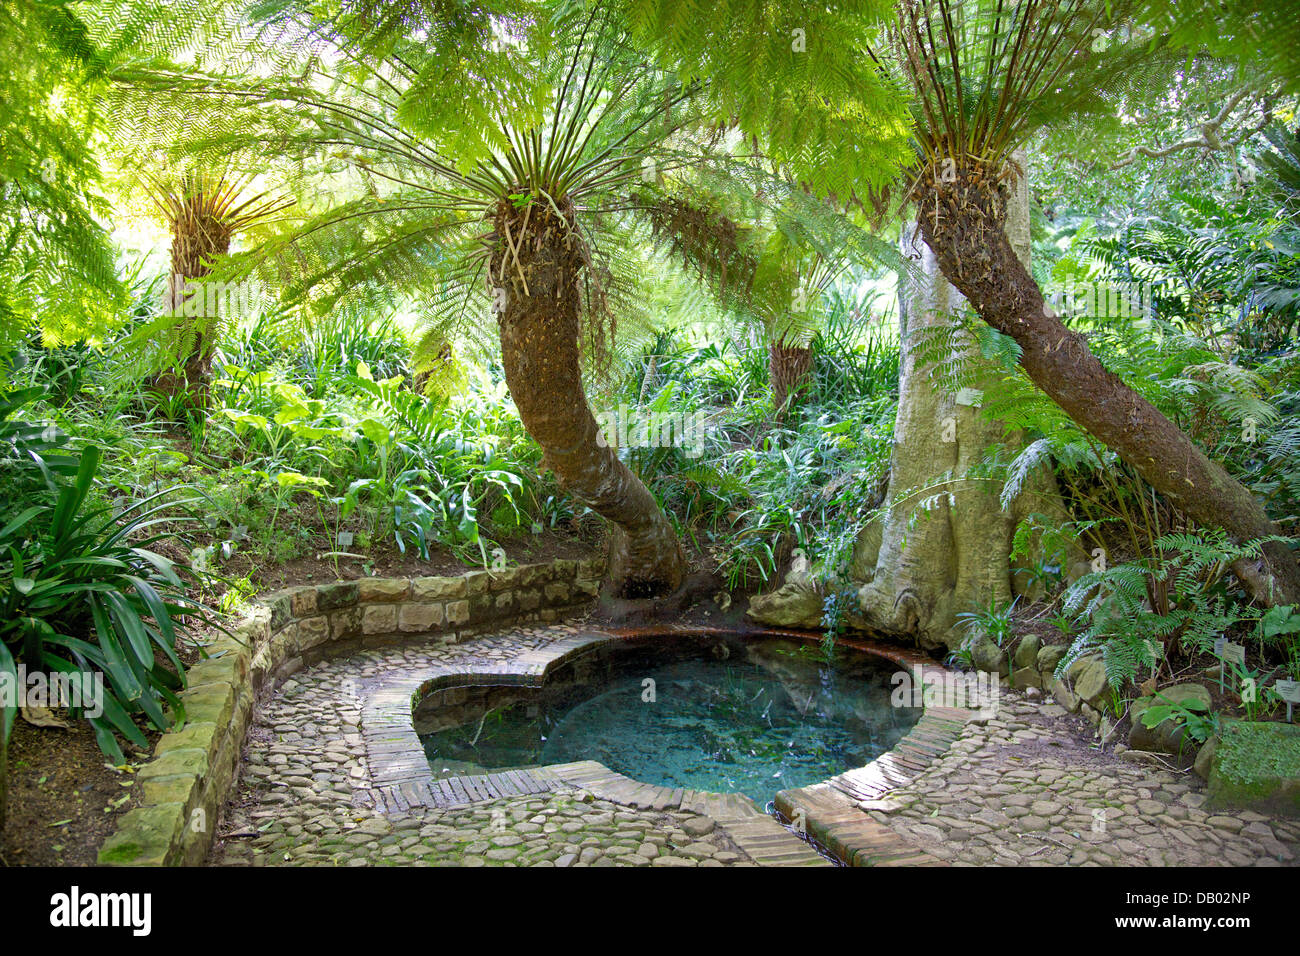 Colonel Bird's Bath in Kirstenbosch, Cape Town, South Africa, dates back to approximately 1811. Stock Photo